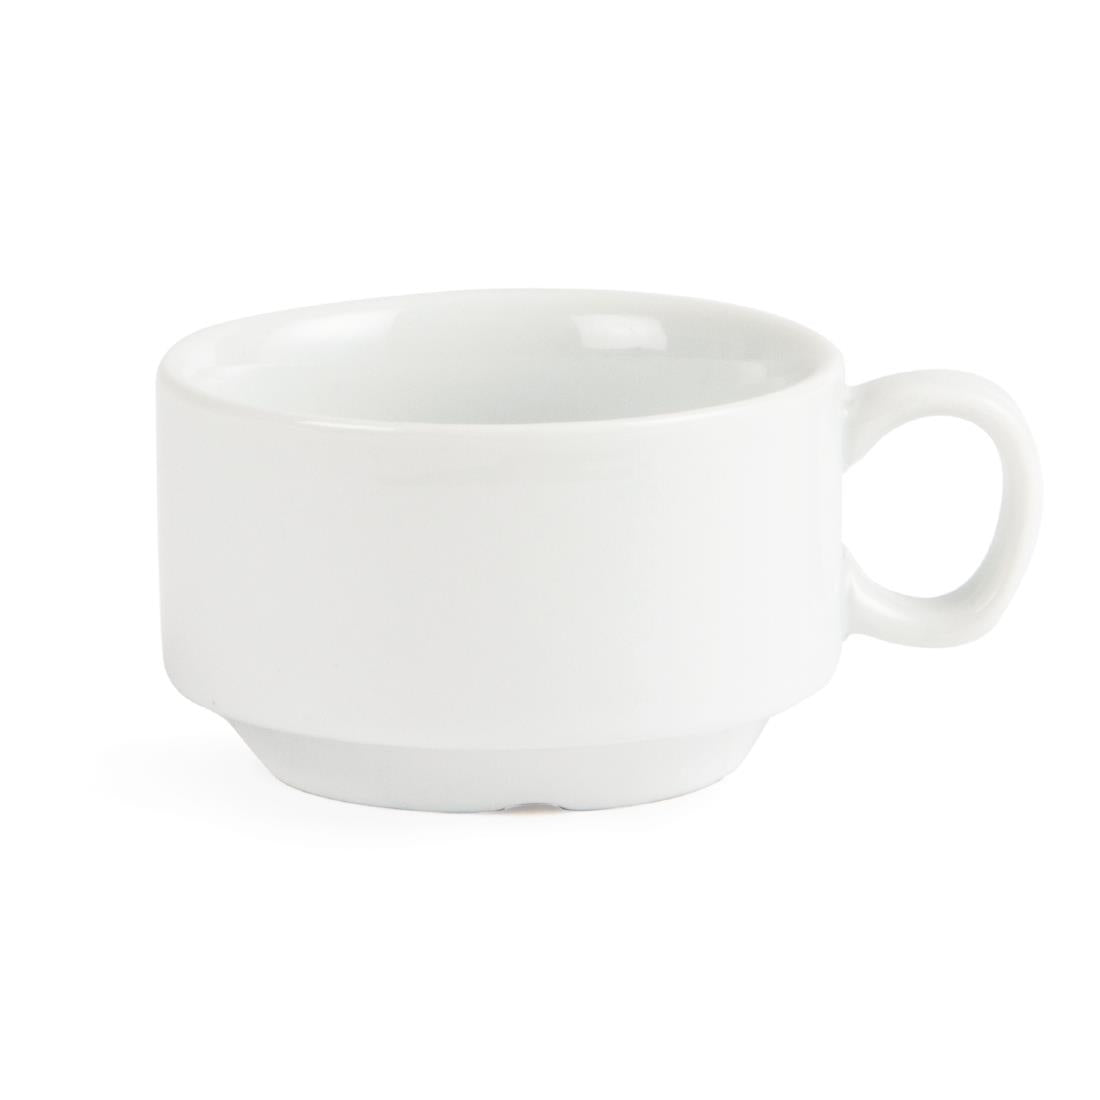 CB471 Olympia Whiteware Stacking Espresso Cups 85ml 3oz (Pack of 12)